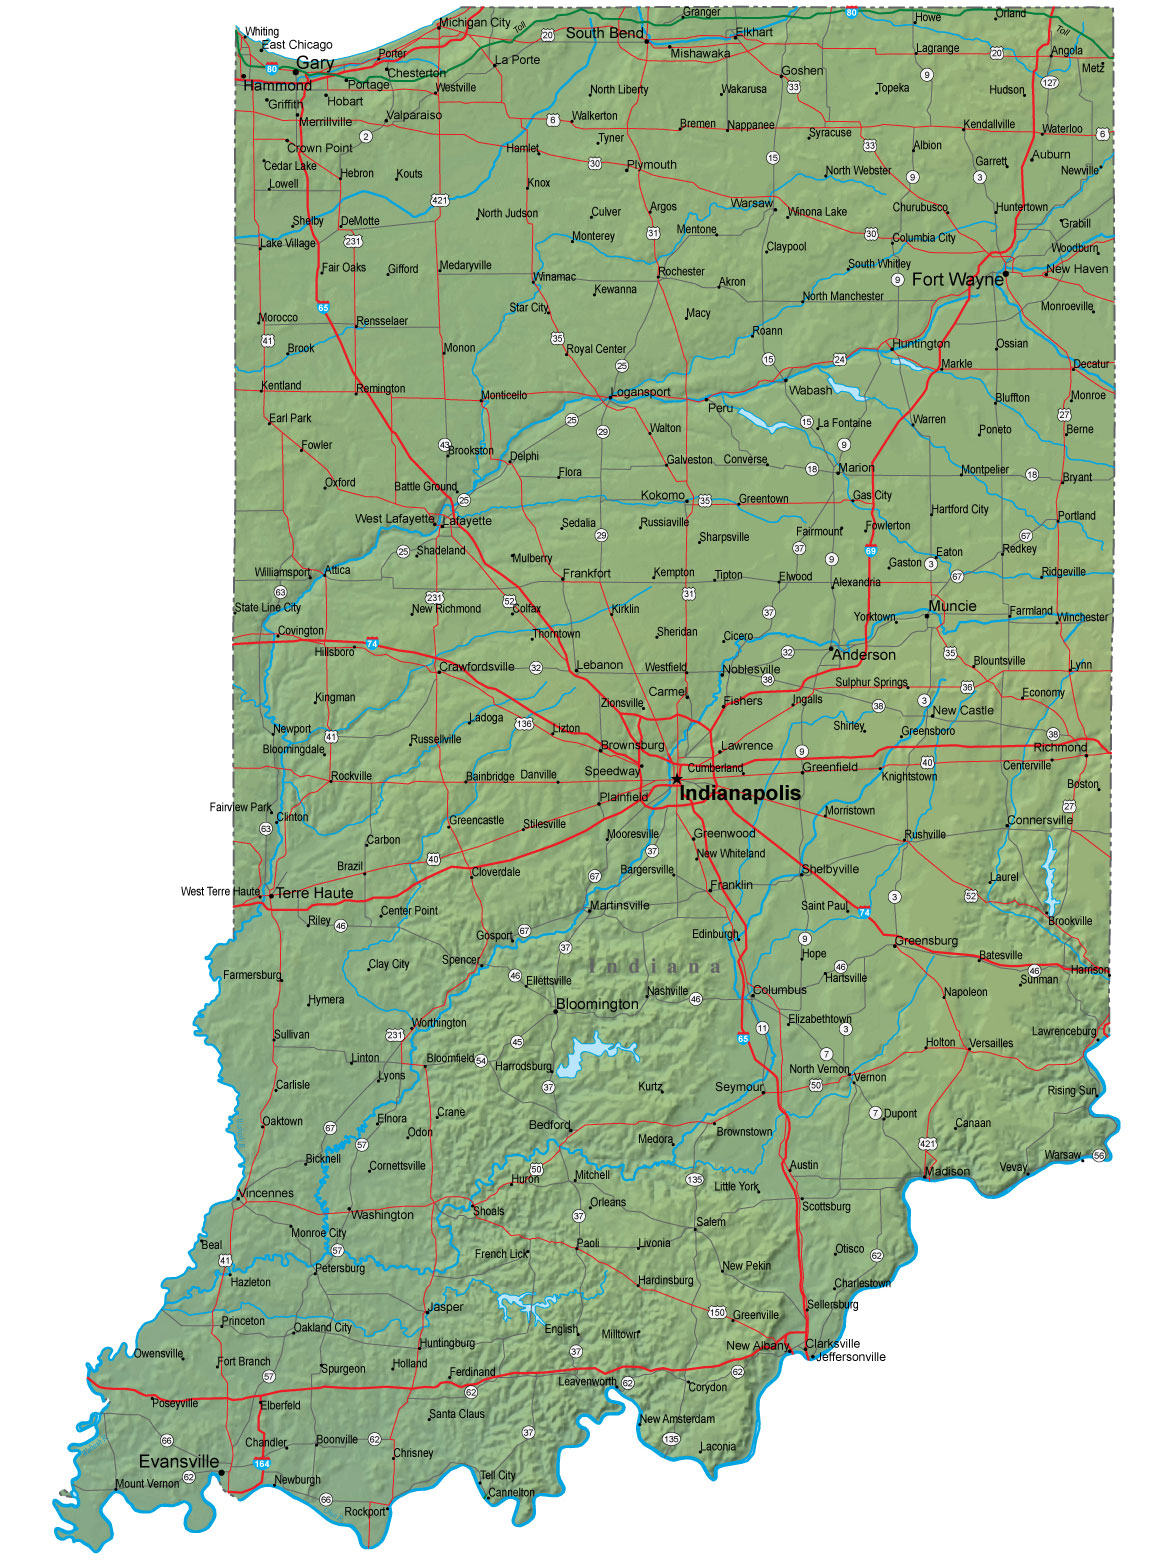 Very popular images: map of Indiana cities